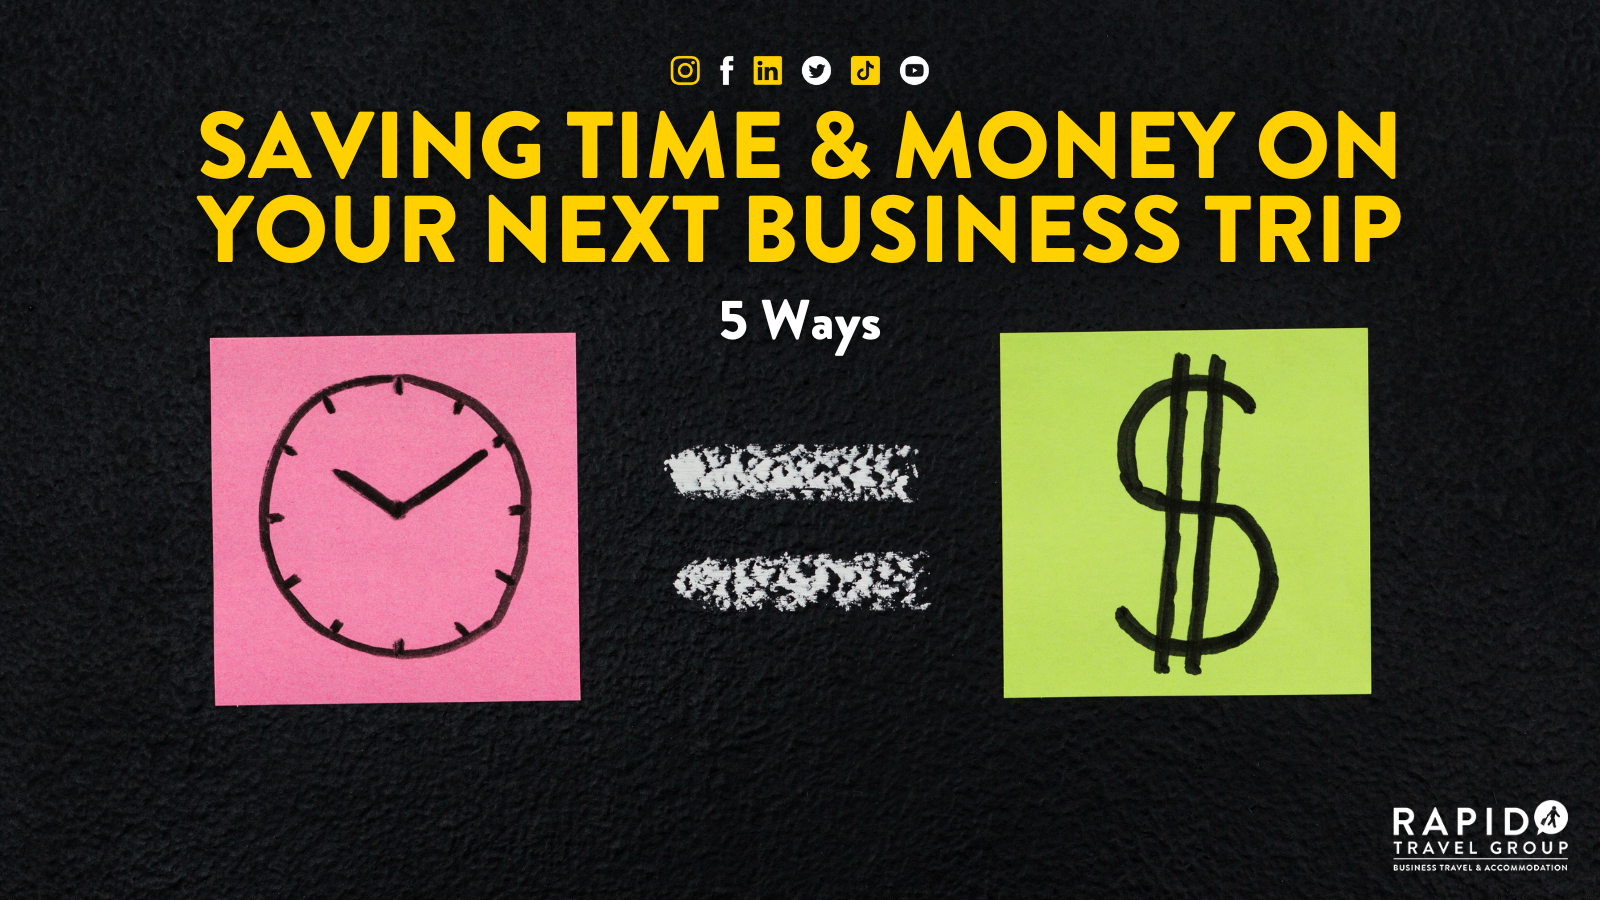 Saving time and money on your next business trip